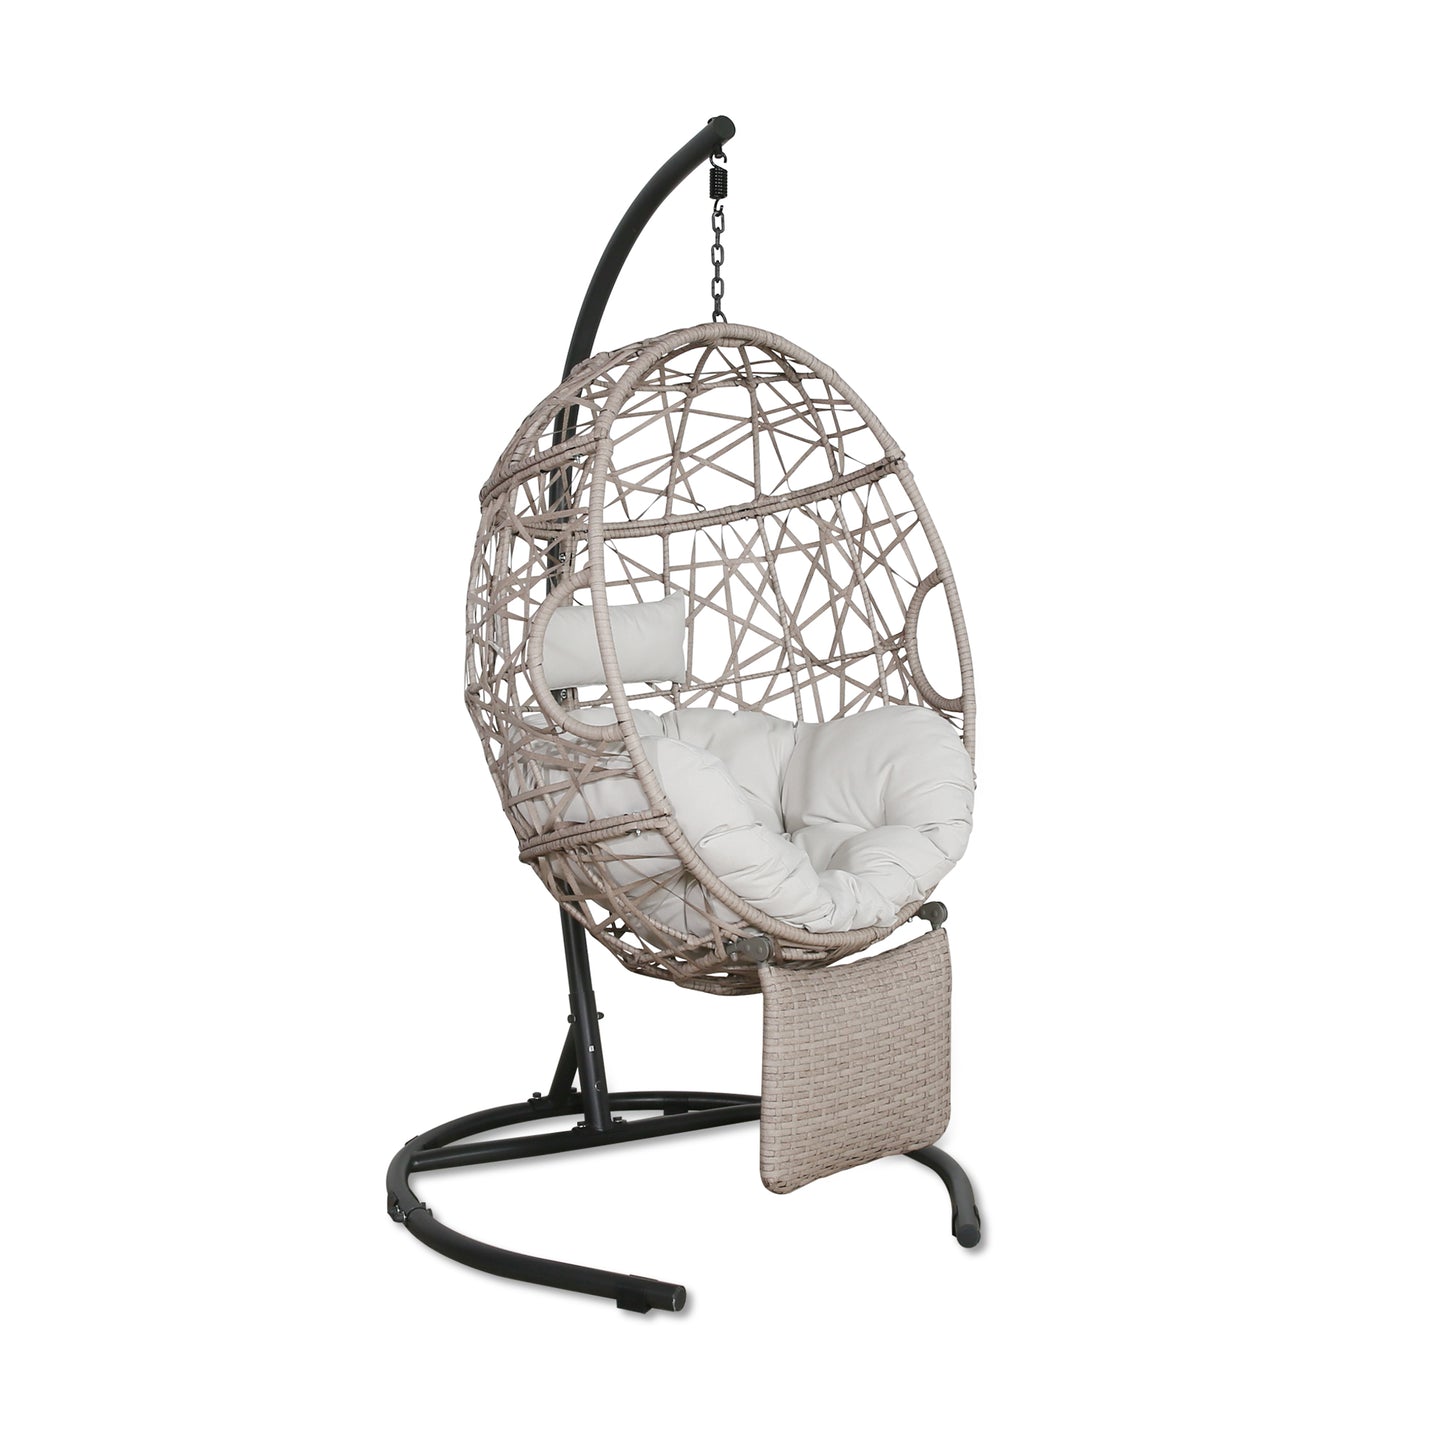 Outdoor Indoor Rattan Egg Swing Chair with Stand and Extendable Footrest, Beige